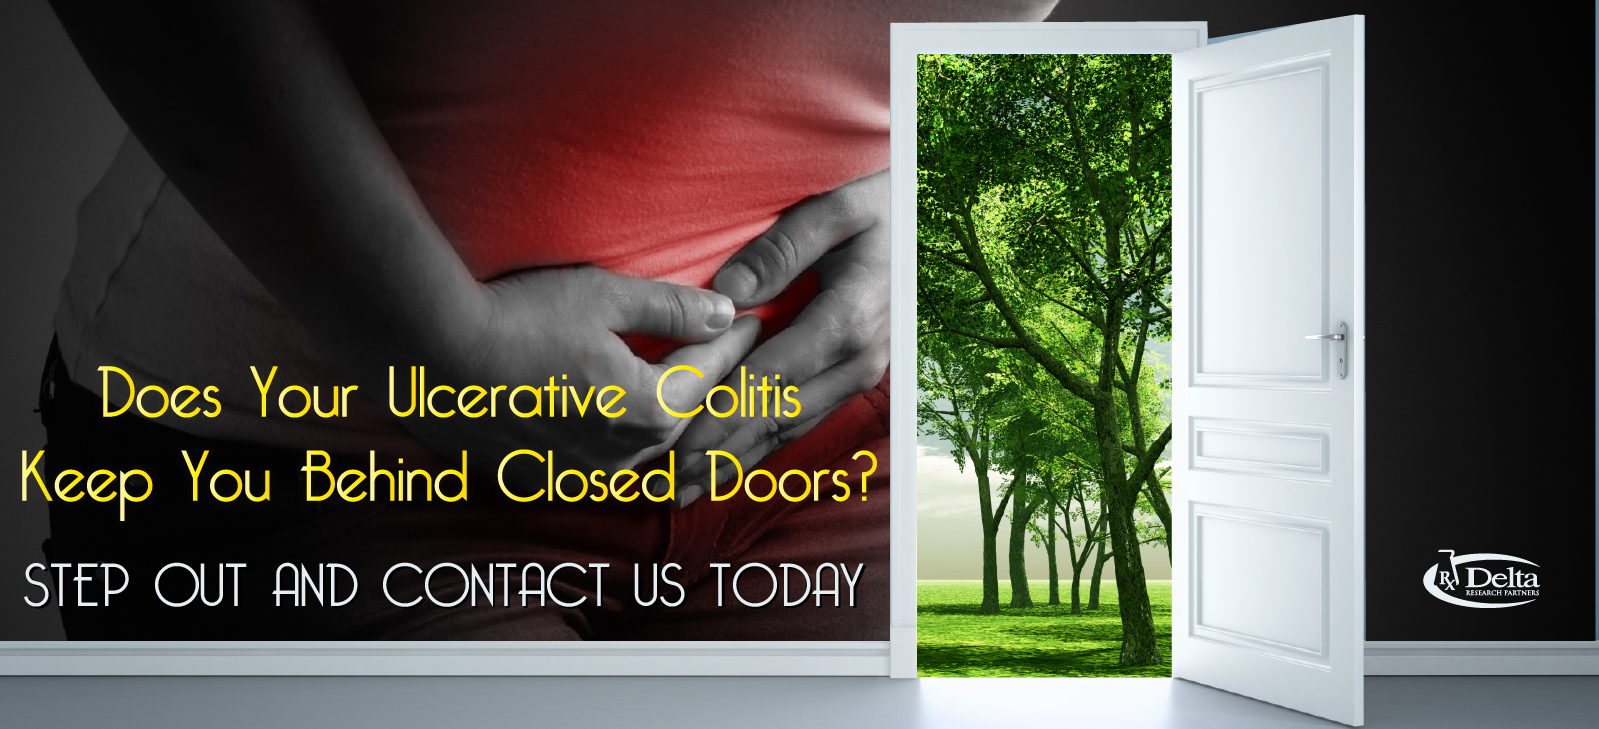 Ulcerative colitis keeps you at home because you never know when the symptoms will strike